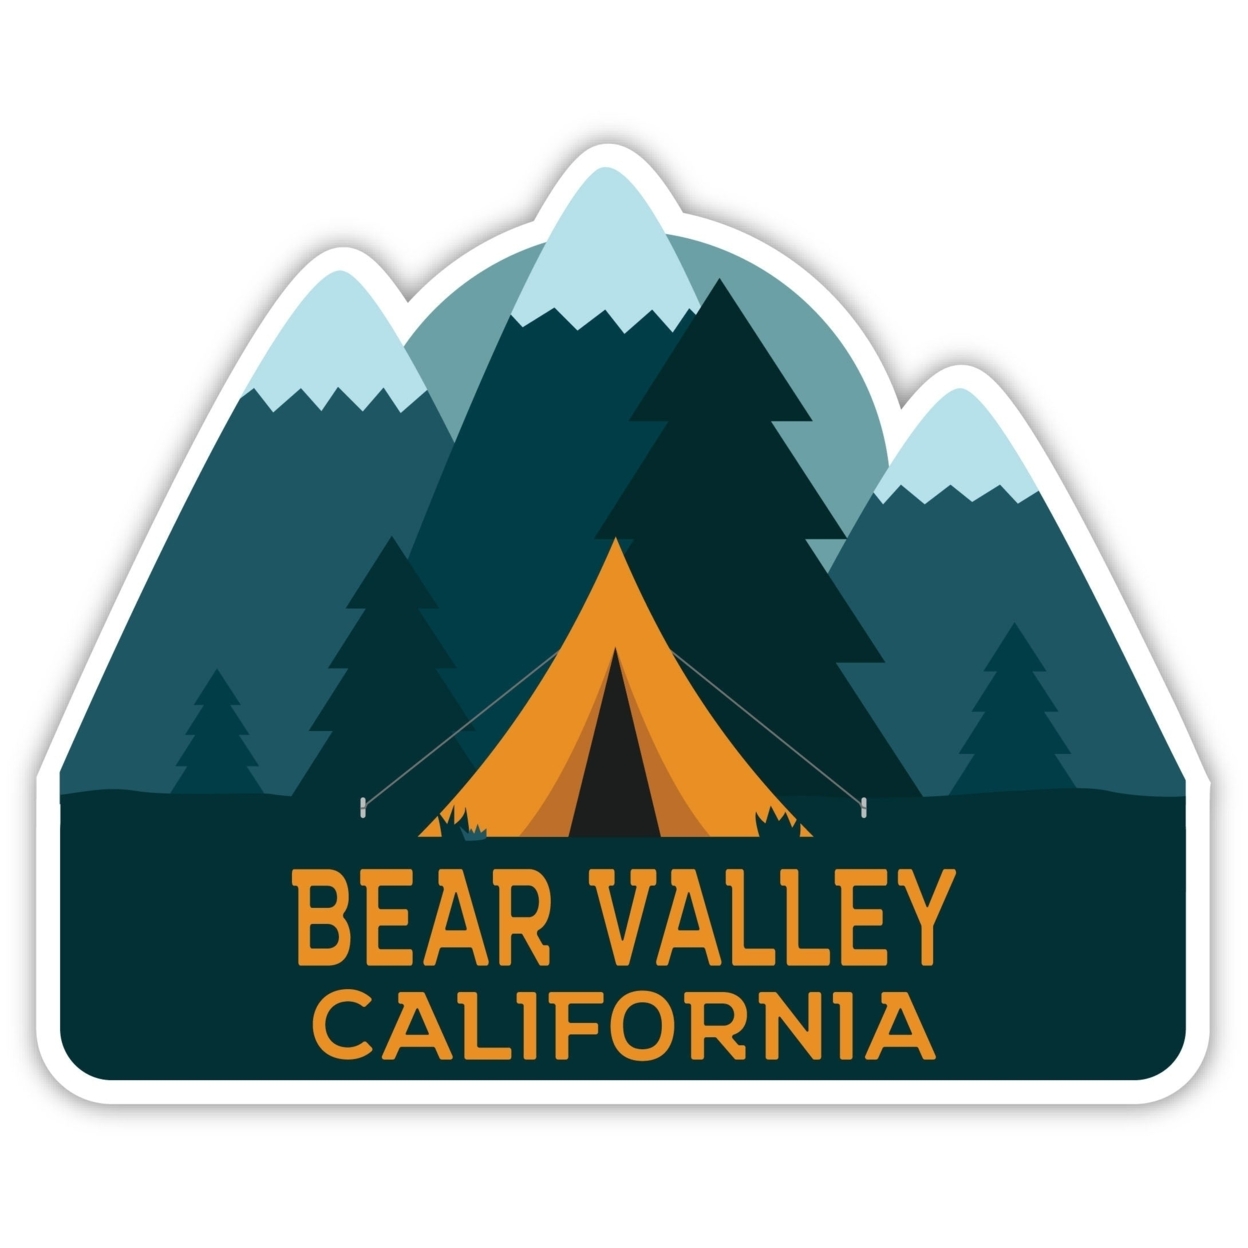 Bear Valley California Souvenir Decorative Stickers (Choose Theme And Size) - 4-Pack, 2-Inch, Tent